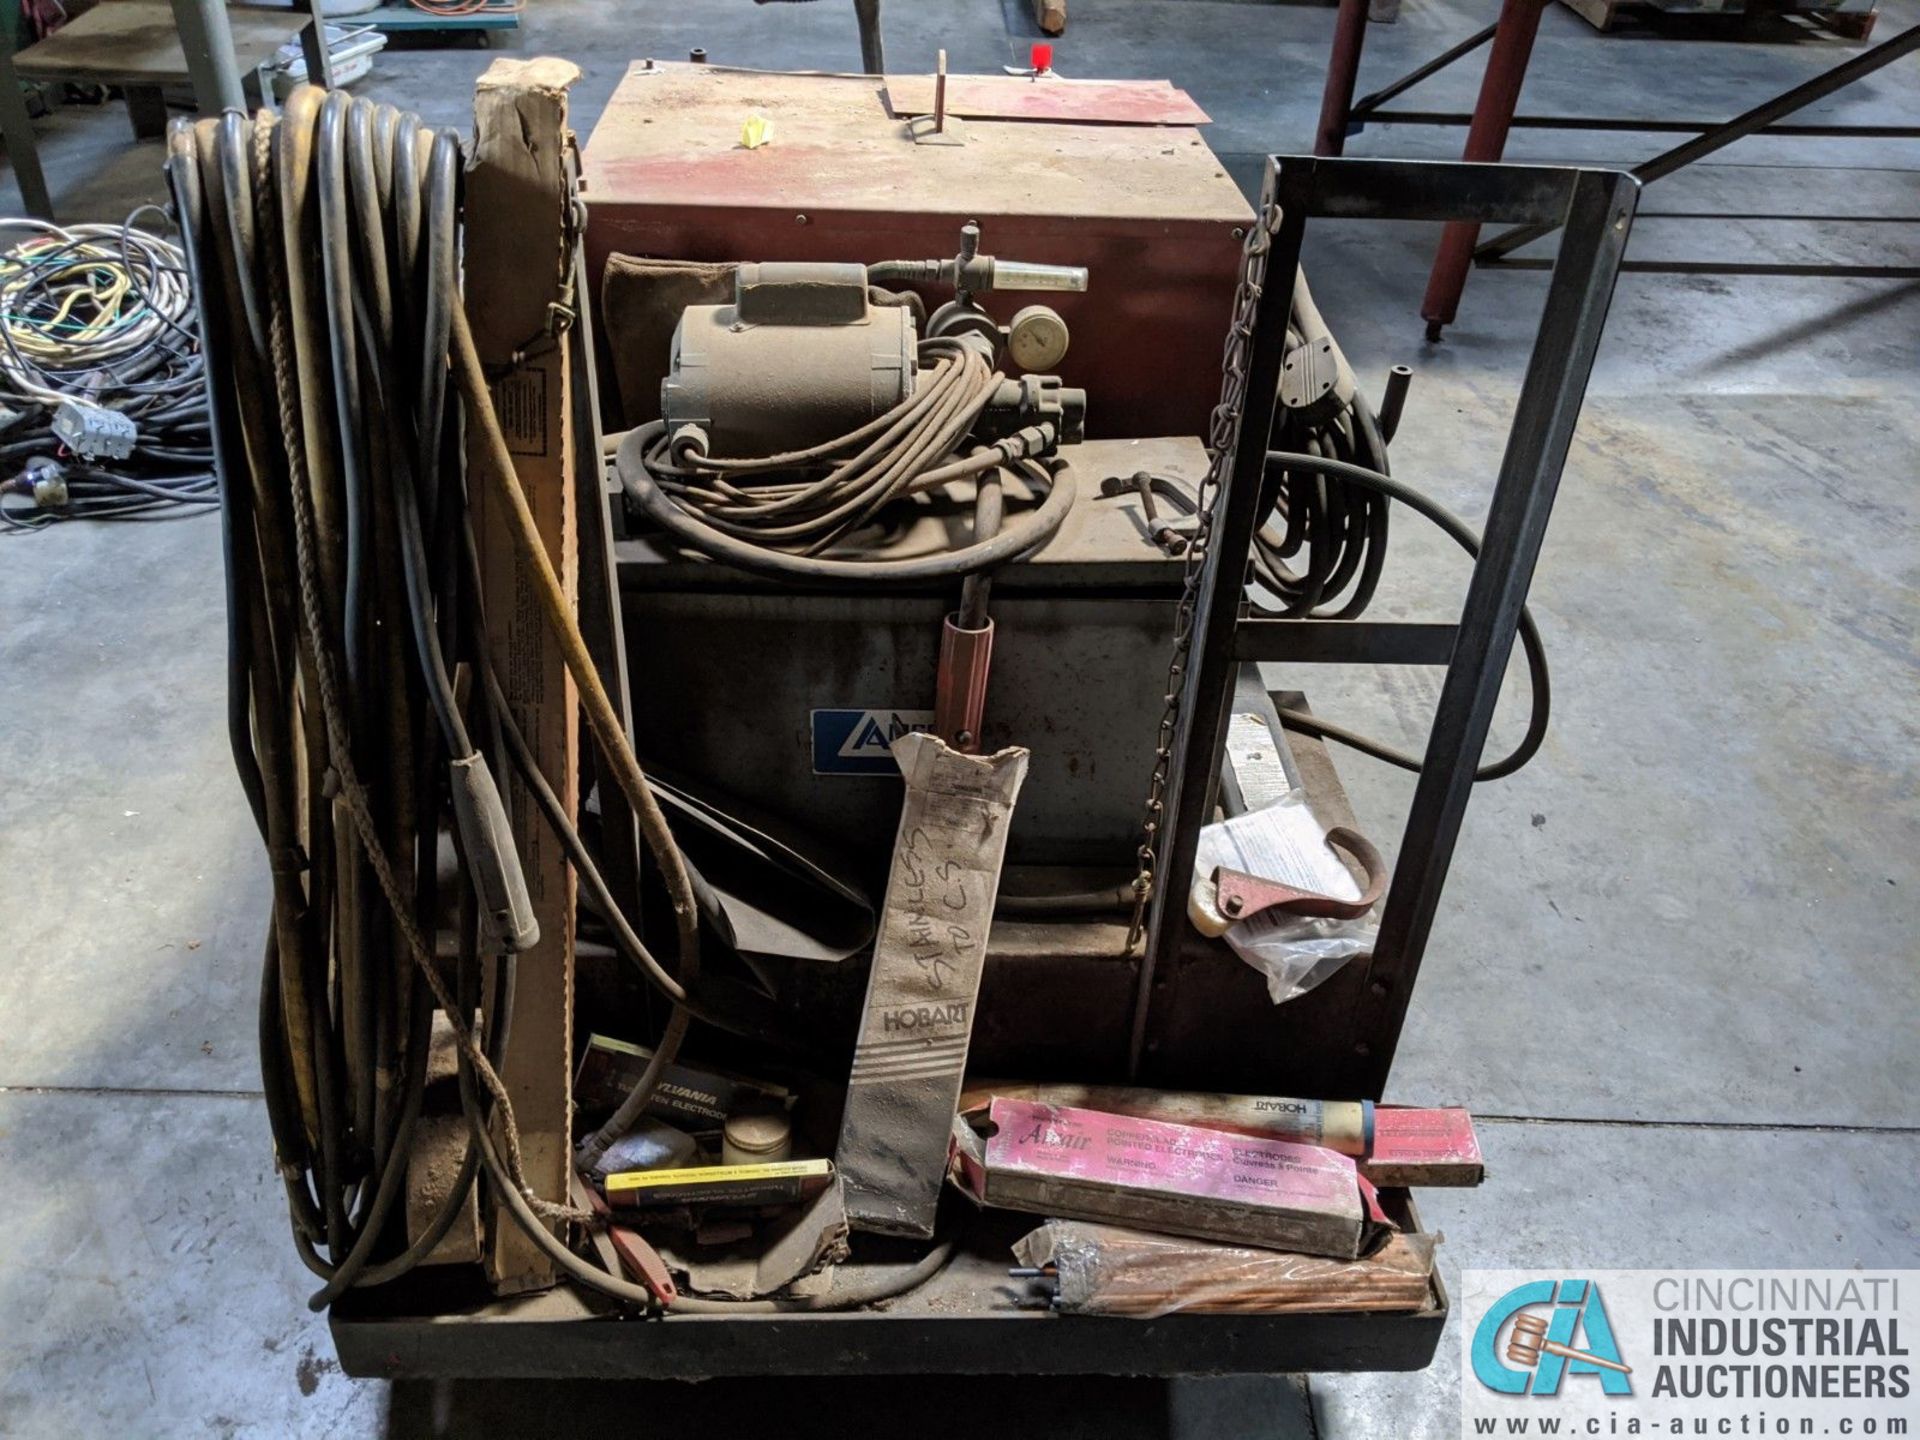 250 AMP LINCOLN MODEL TIG 250/250 WELDER; S/N 533770, MOUNTED ON CART W/ LEADS & AIRCO CHILLER (8635 - Image 3 of 5